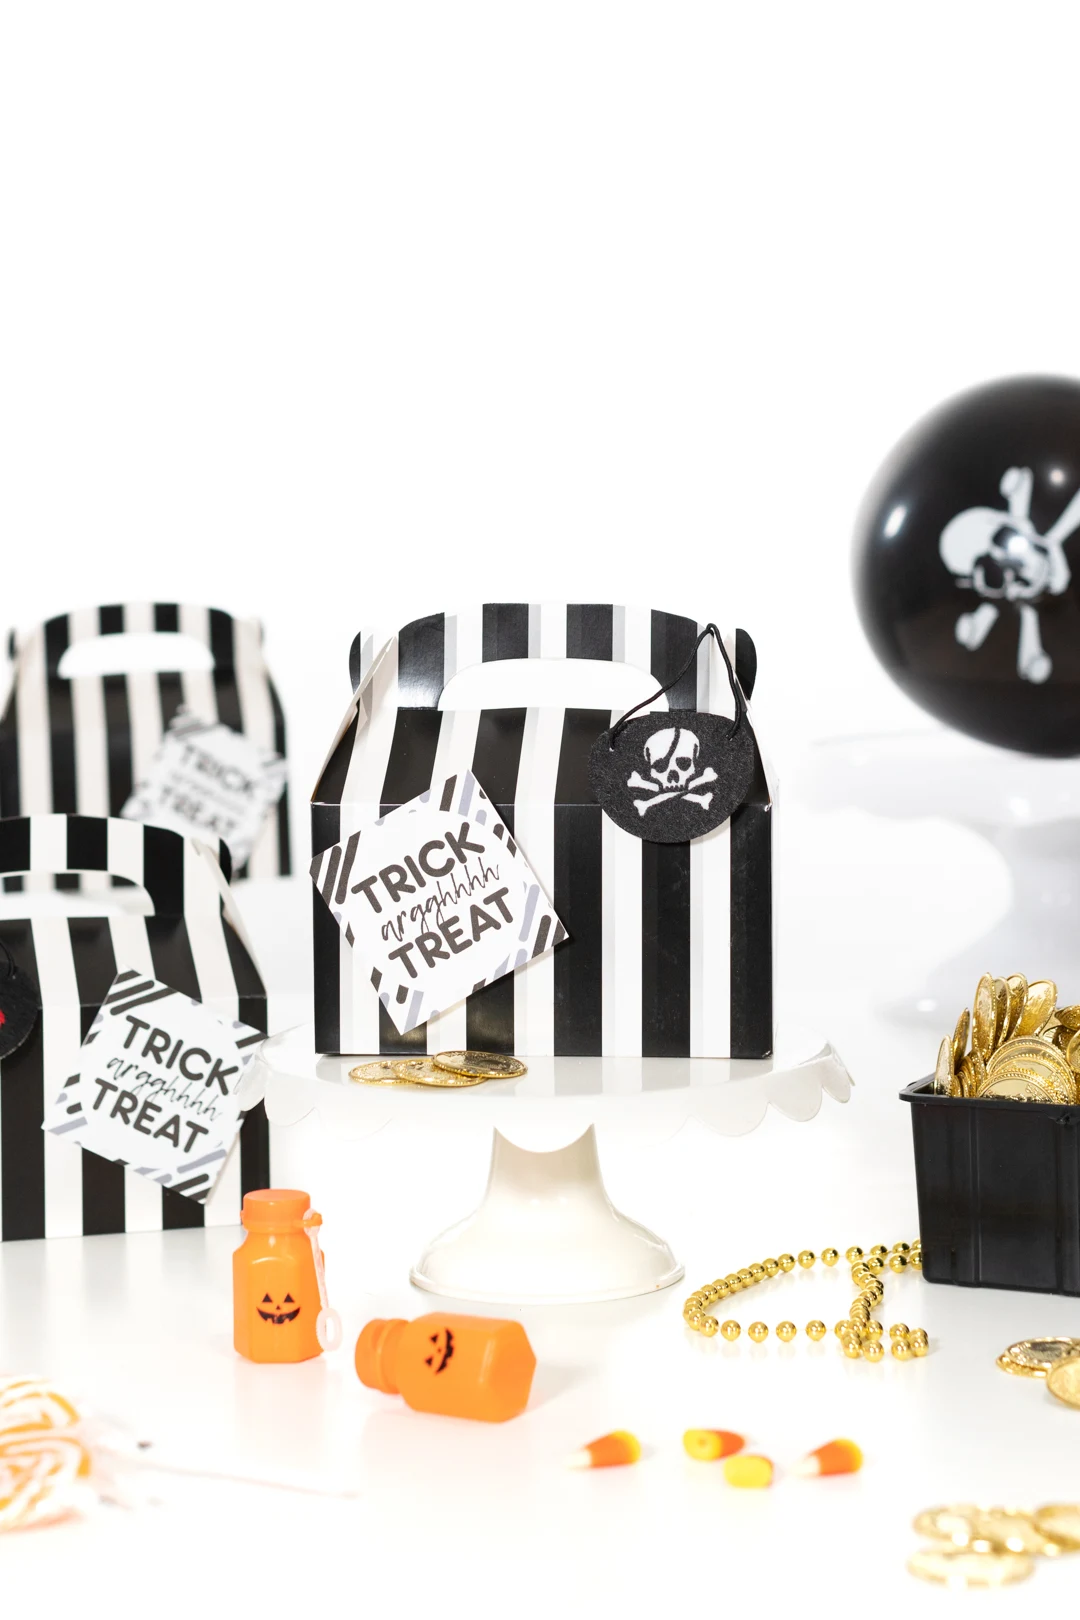 pirate favor boxes, black and white striped with gift tag on them that says trick arrgghh treat on it. Cute for Halloween door drops.